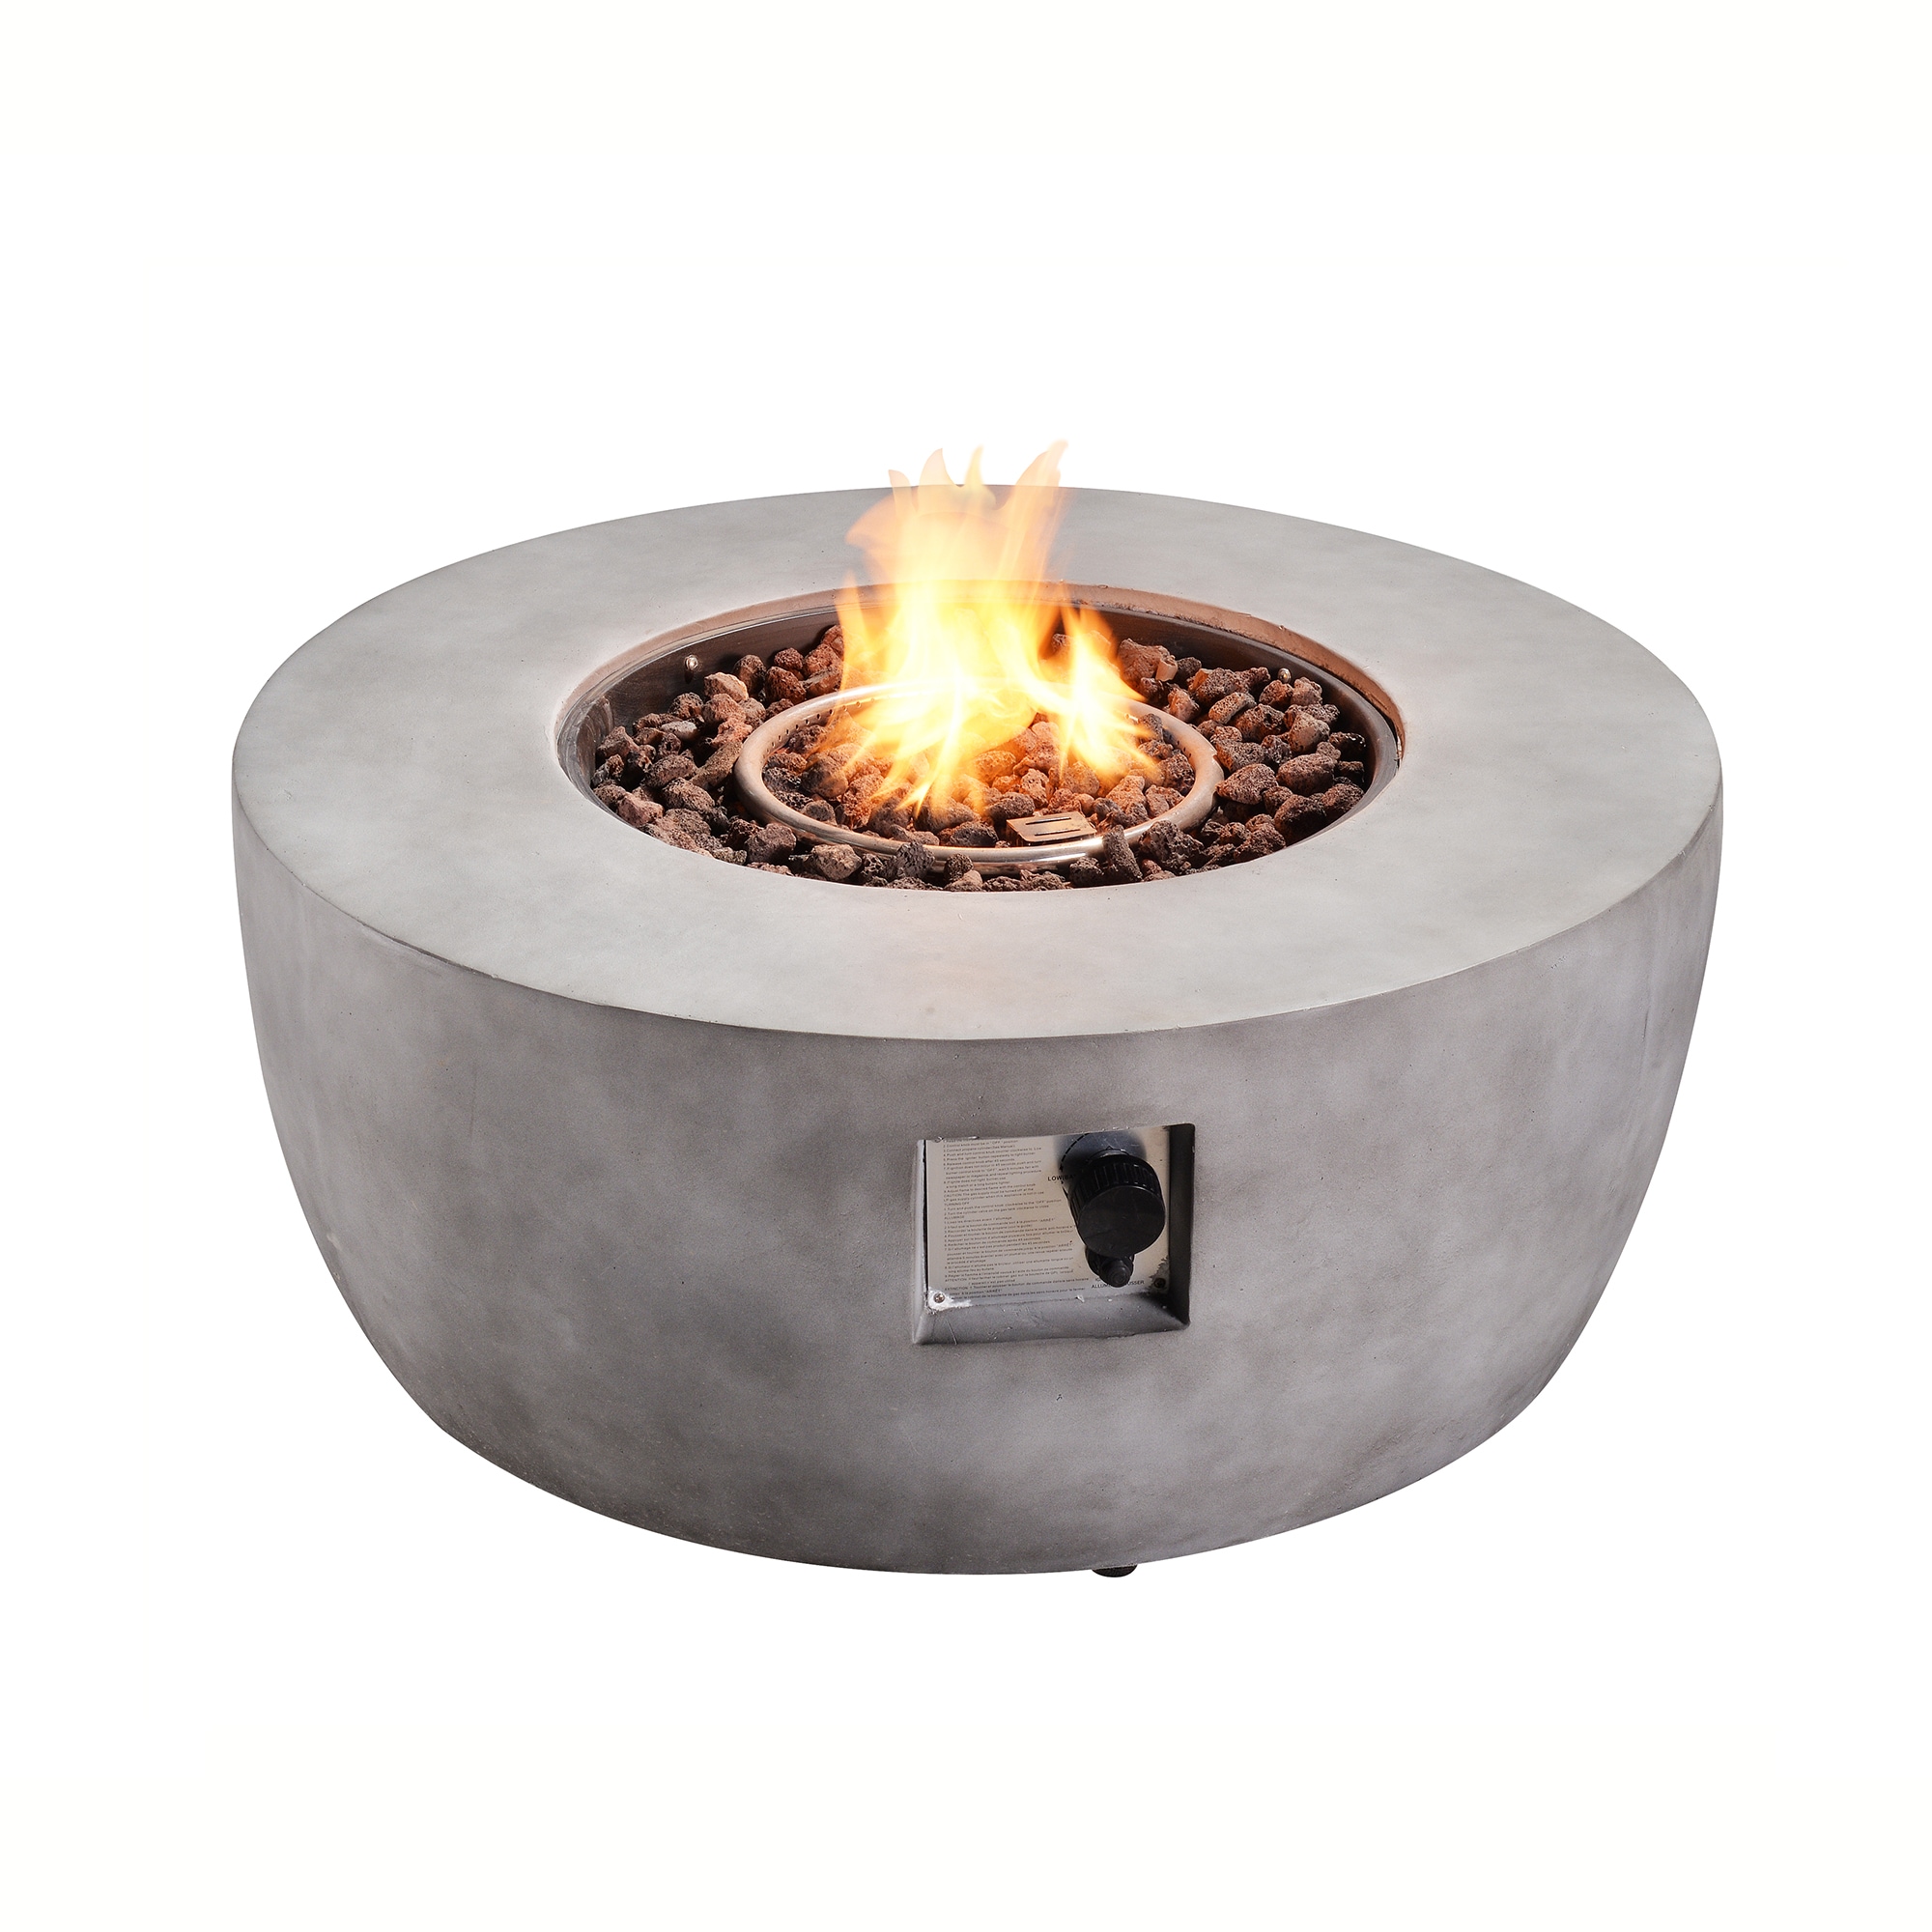 Concrete Propane Gas Fire Pit, Are Propane Fire Pits Safe On Grass